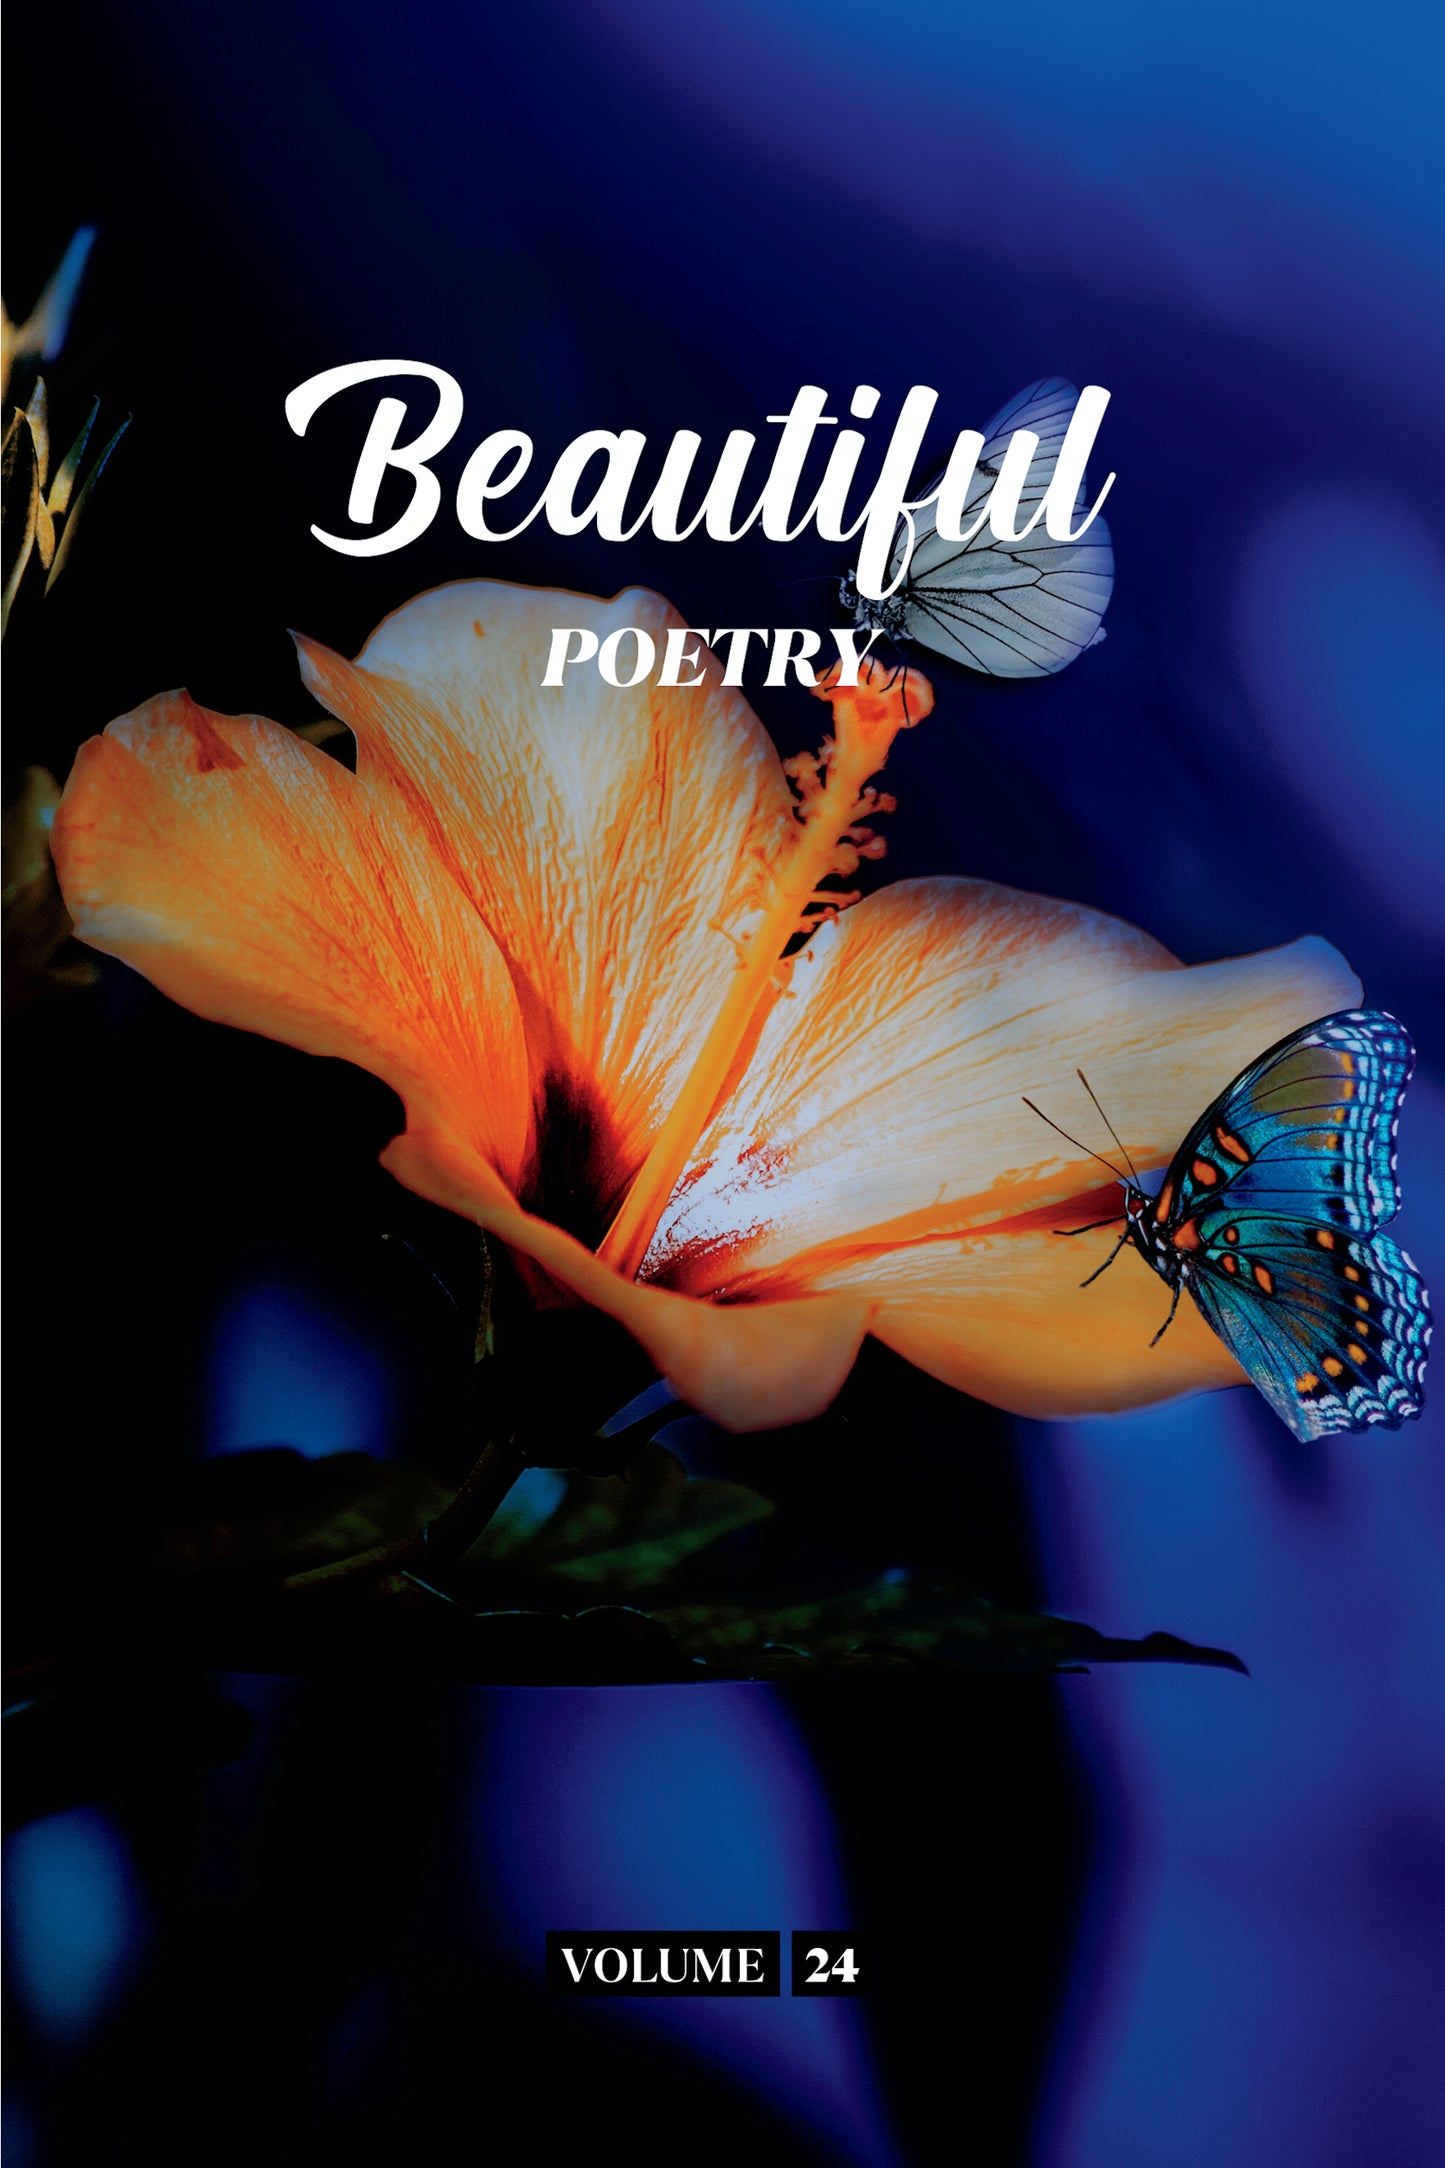 Beautiful Poetry (Volume 24) - Physical Book (Pre-Order)